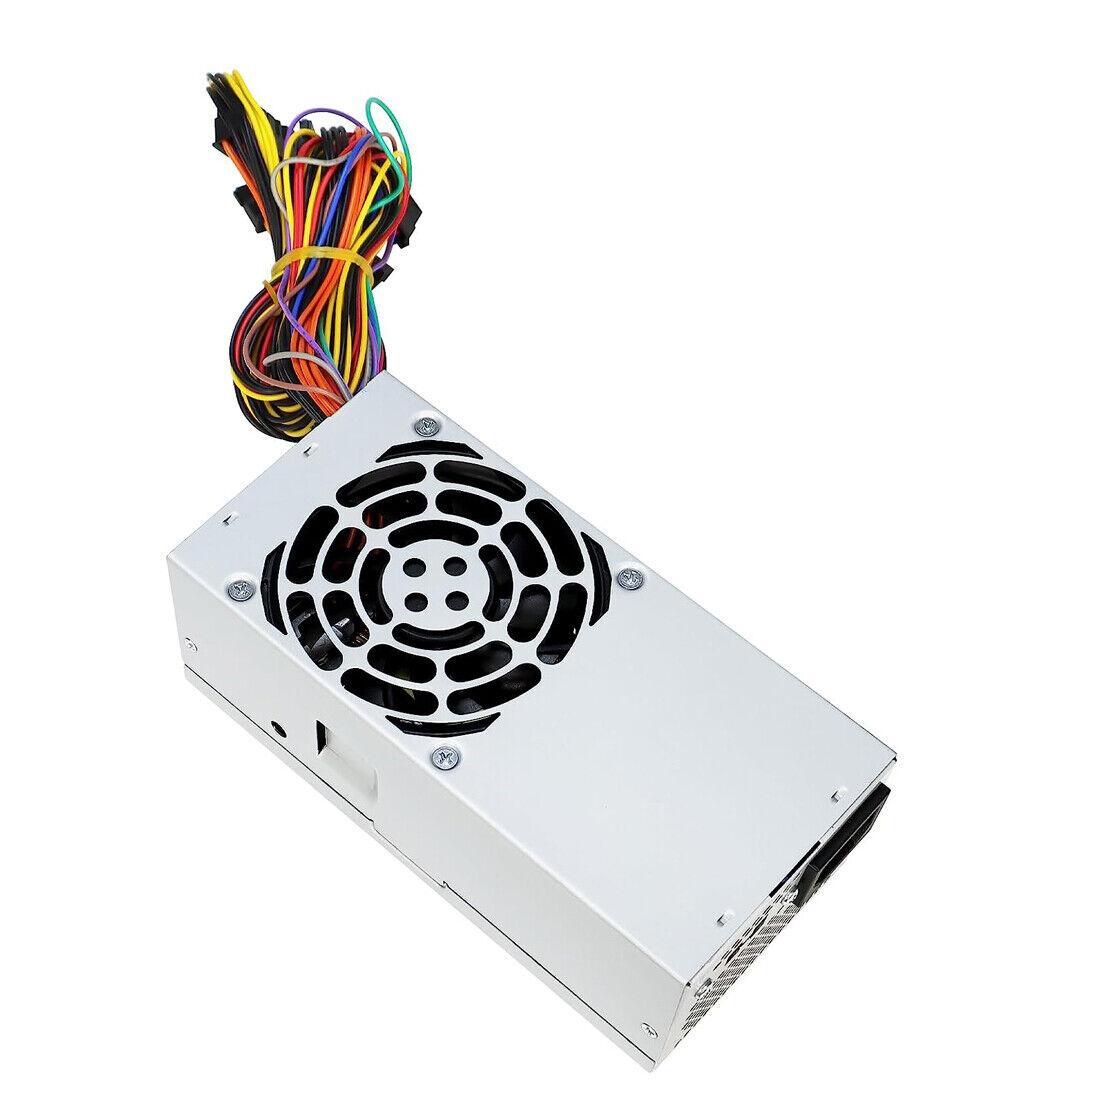 PC8044 220W DPS-220AB-2 A Fit HP Pavilion S5000 S5306 Power Supply 504965-001 US